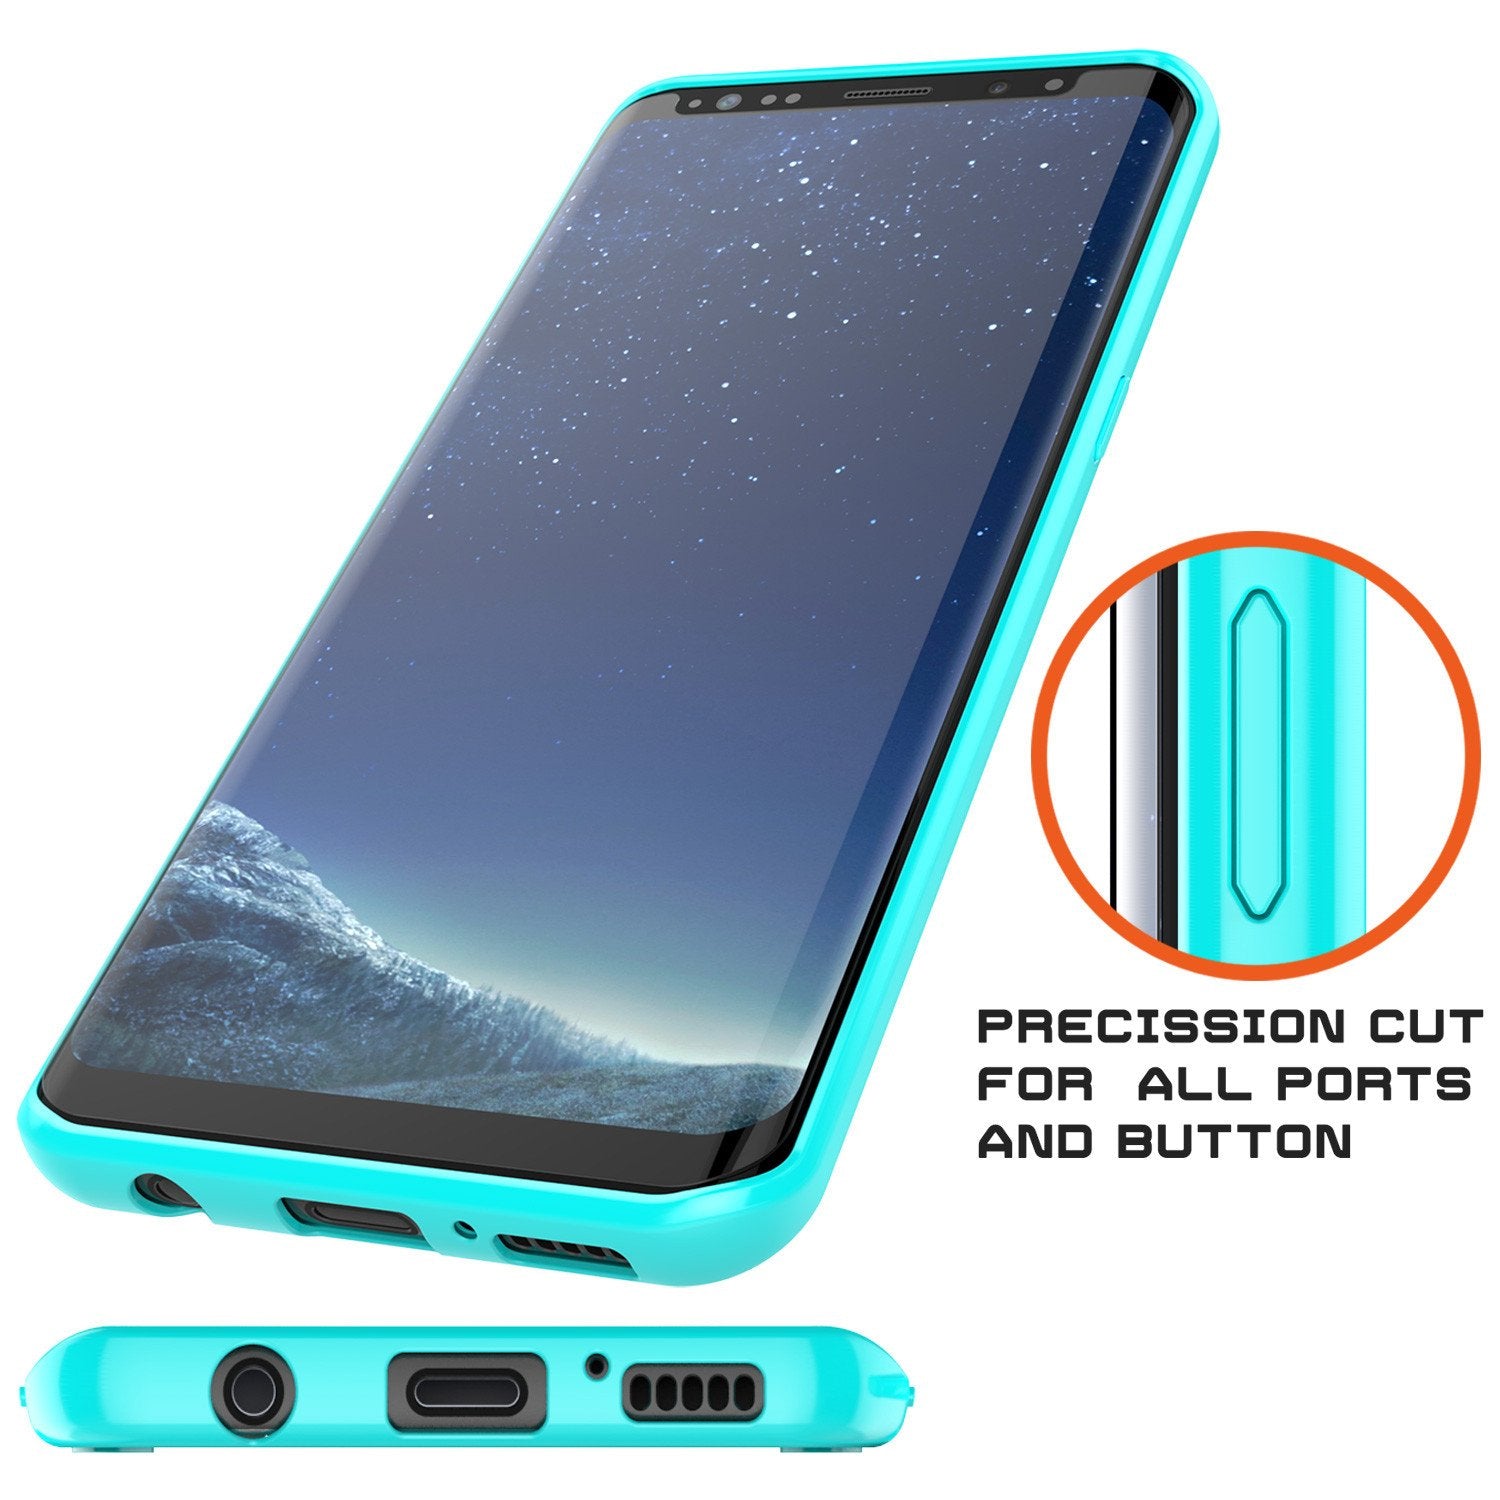 Galaxy S8 Case, Punkcase [LUCID 2.0 Series] [Slim Fit] [TEAL]